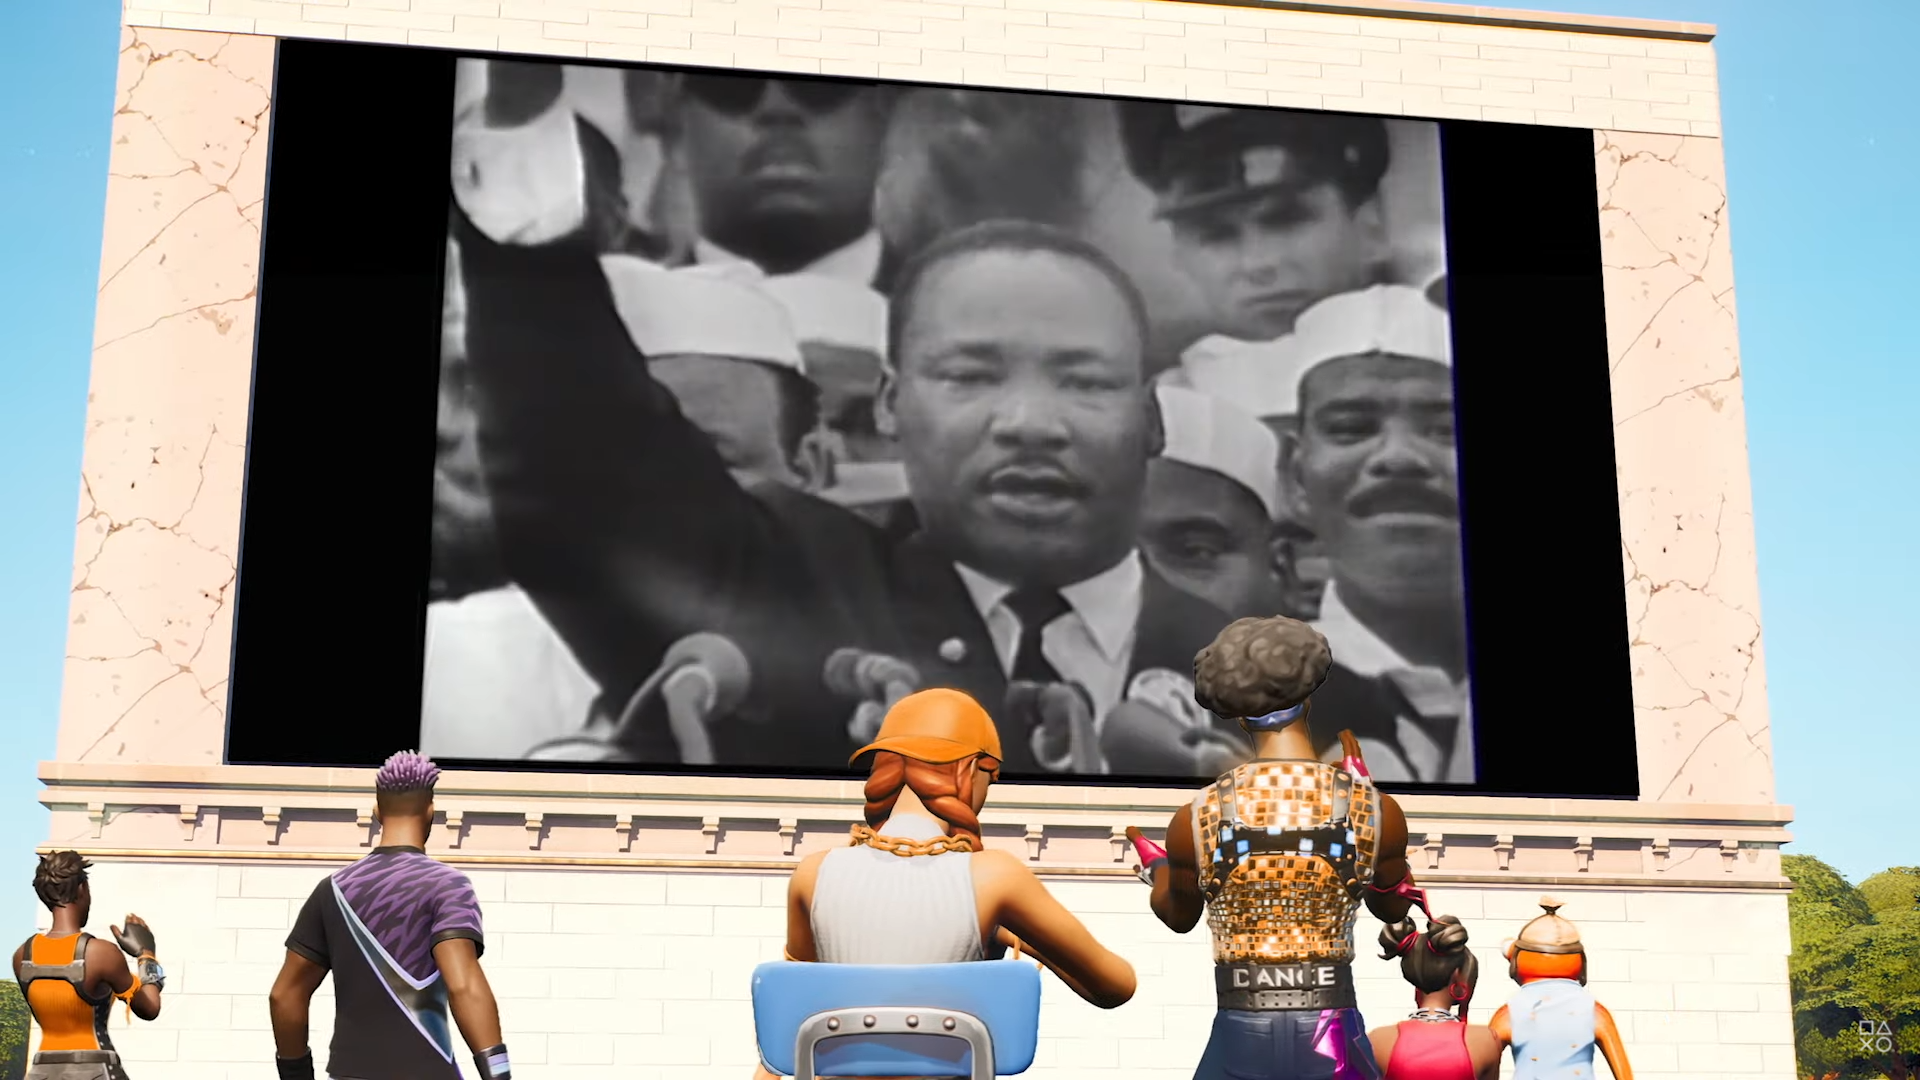 The MLK exhibition in Fortnite.